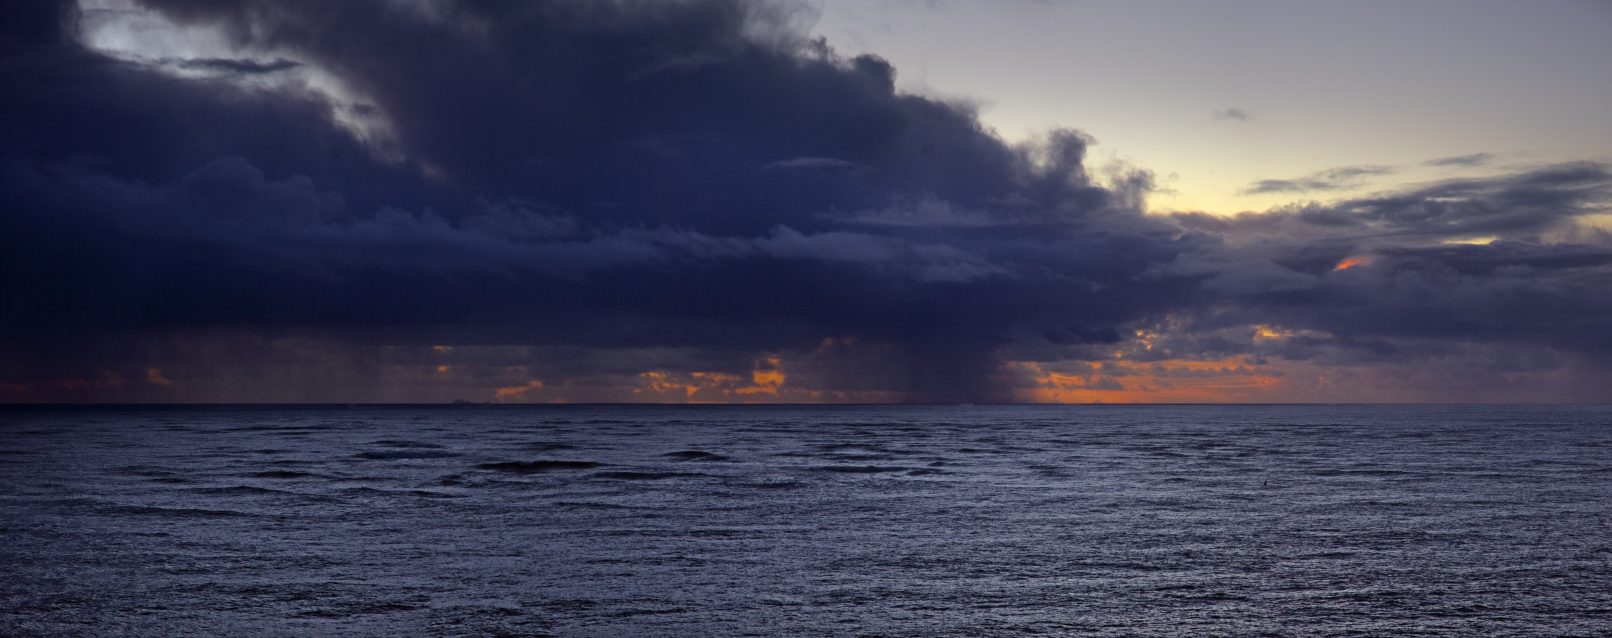 Storm clouds over Pacific at sunset